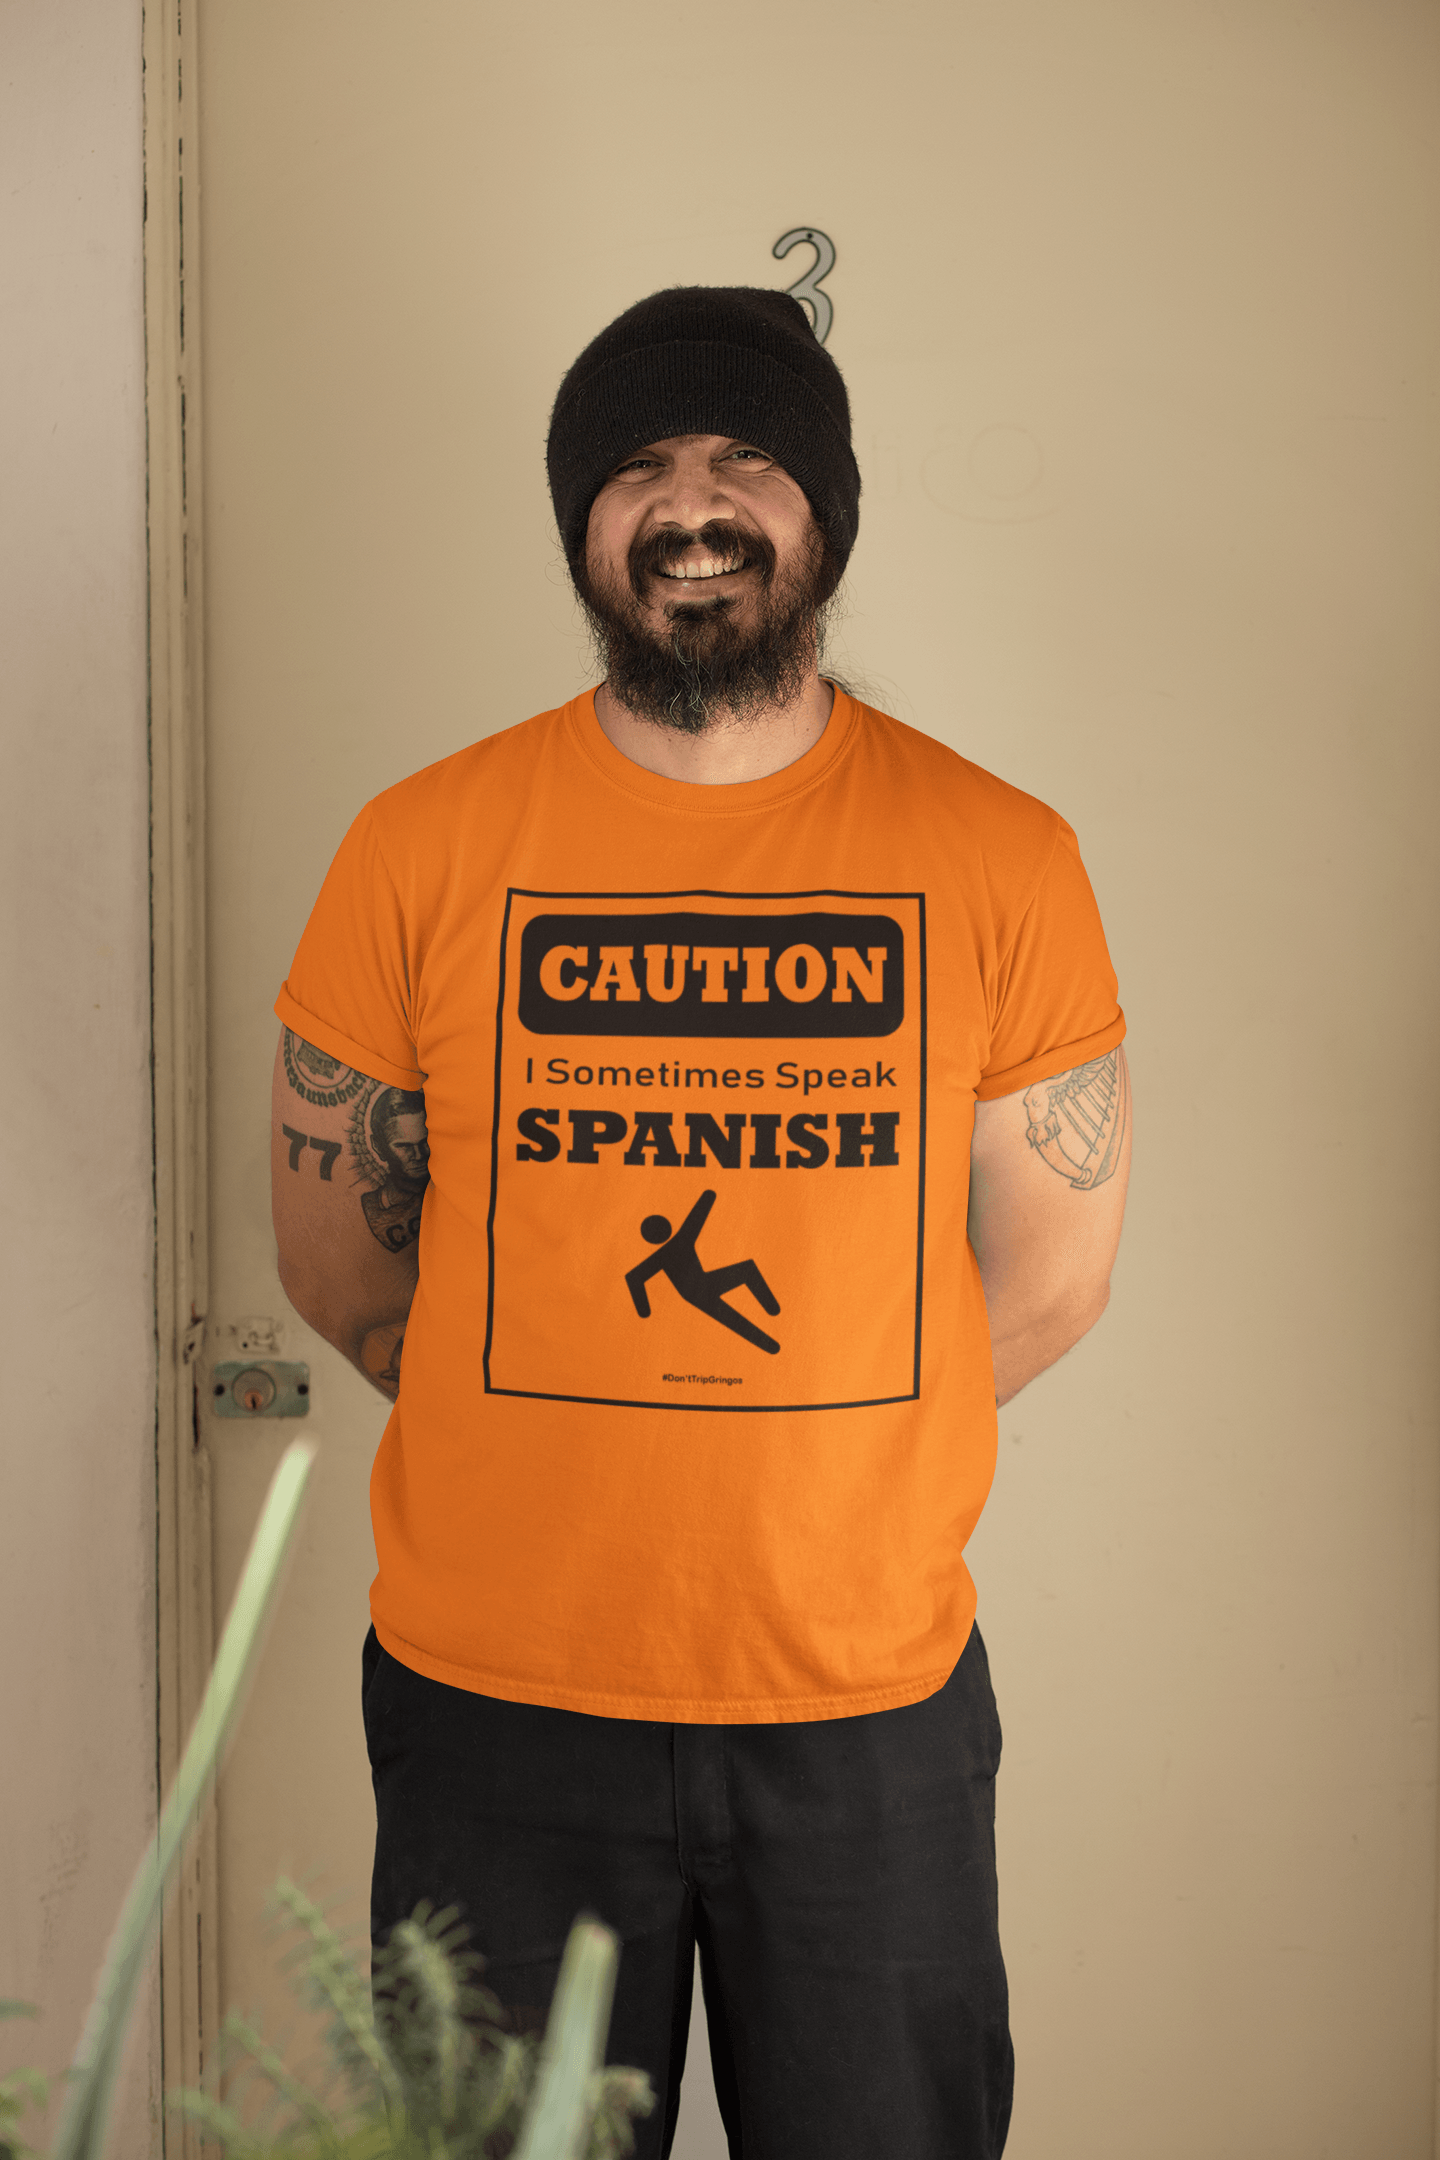 Bright orange t-shirt with black text and design that reads, "Caution I sometimes speak Spanish #Don'tTripGringos " in a caution sign layout. It is available in sizes SM-4XL at www.sanchezhere.com